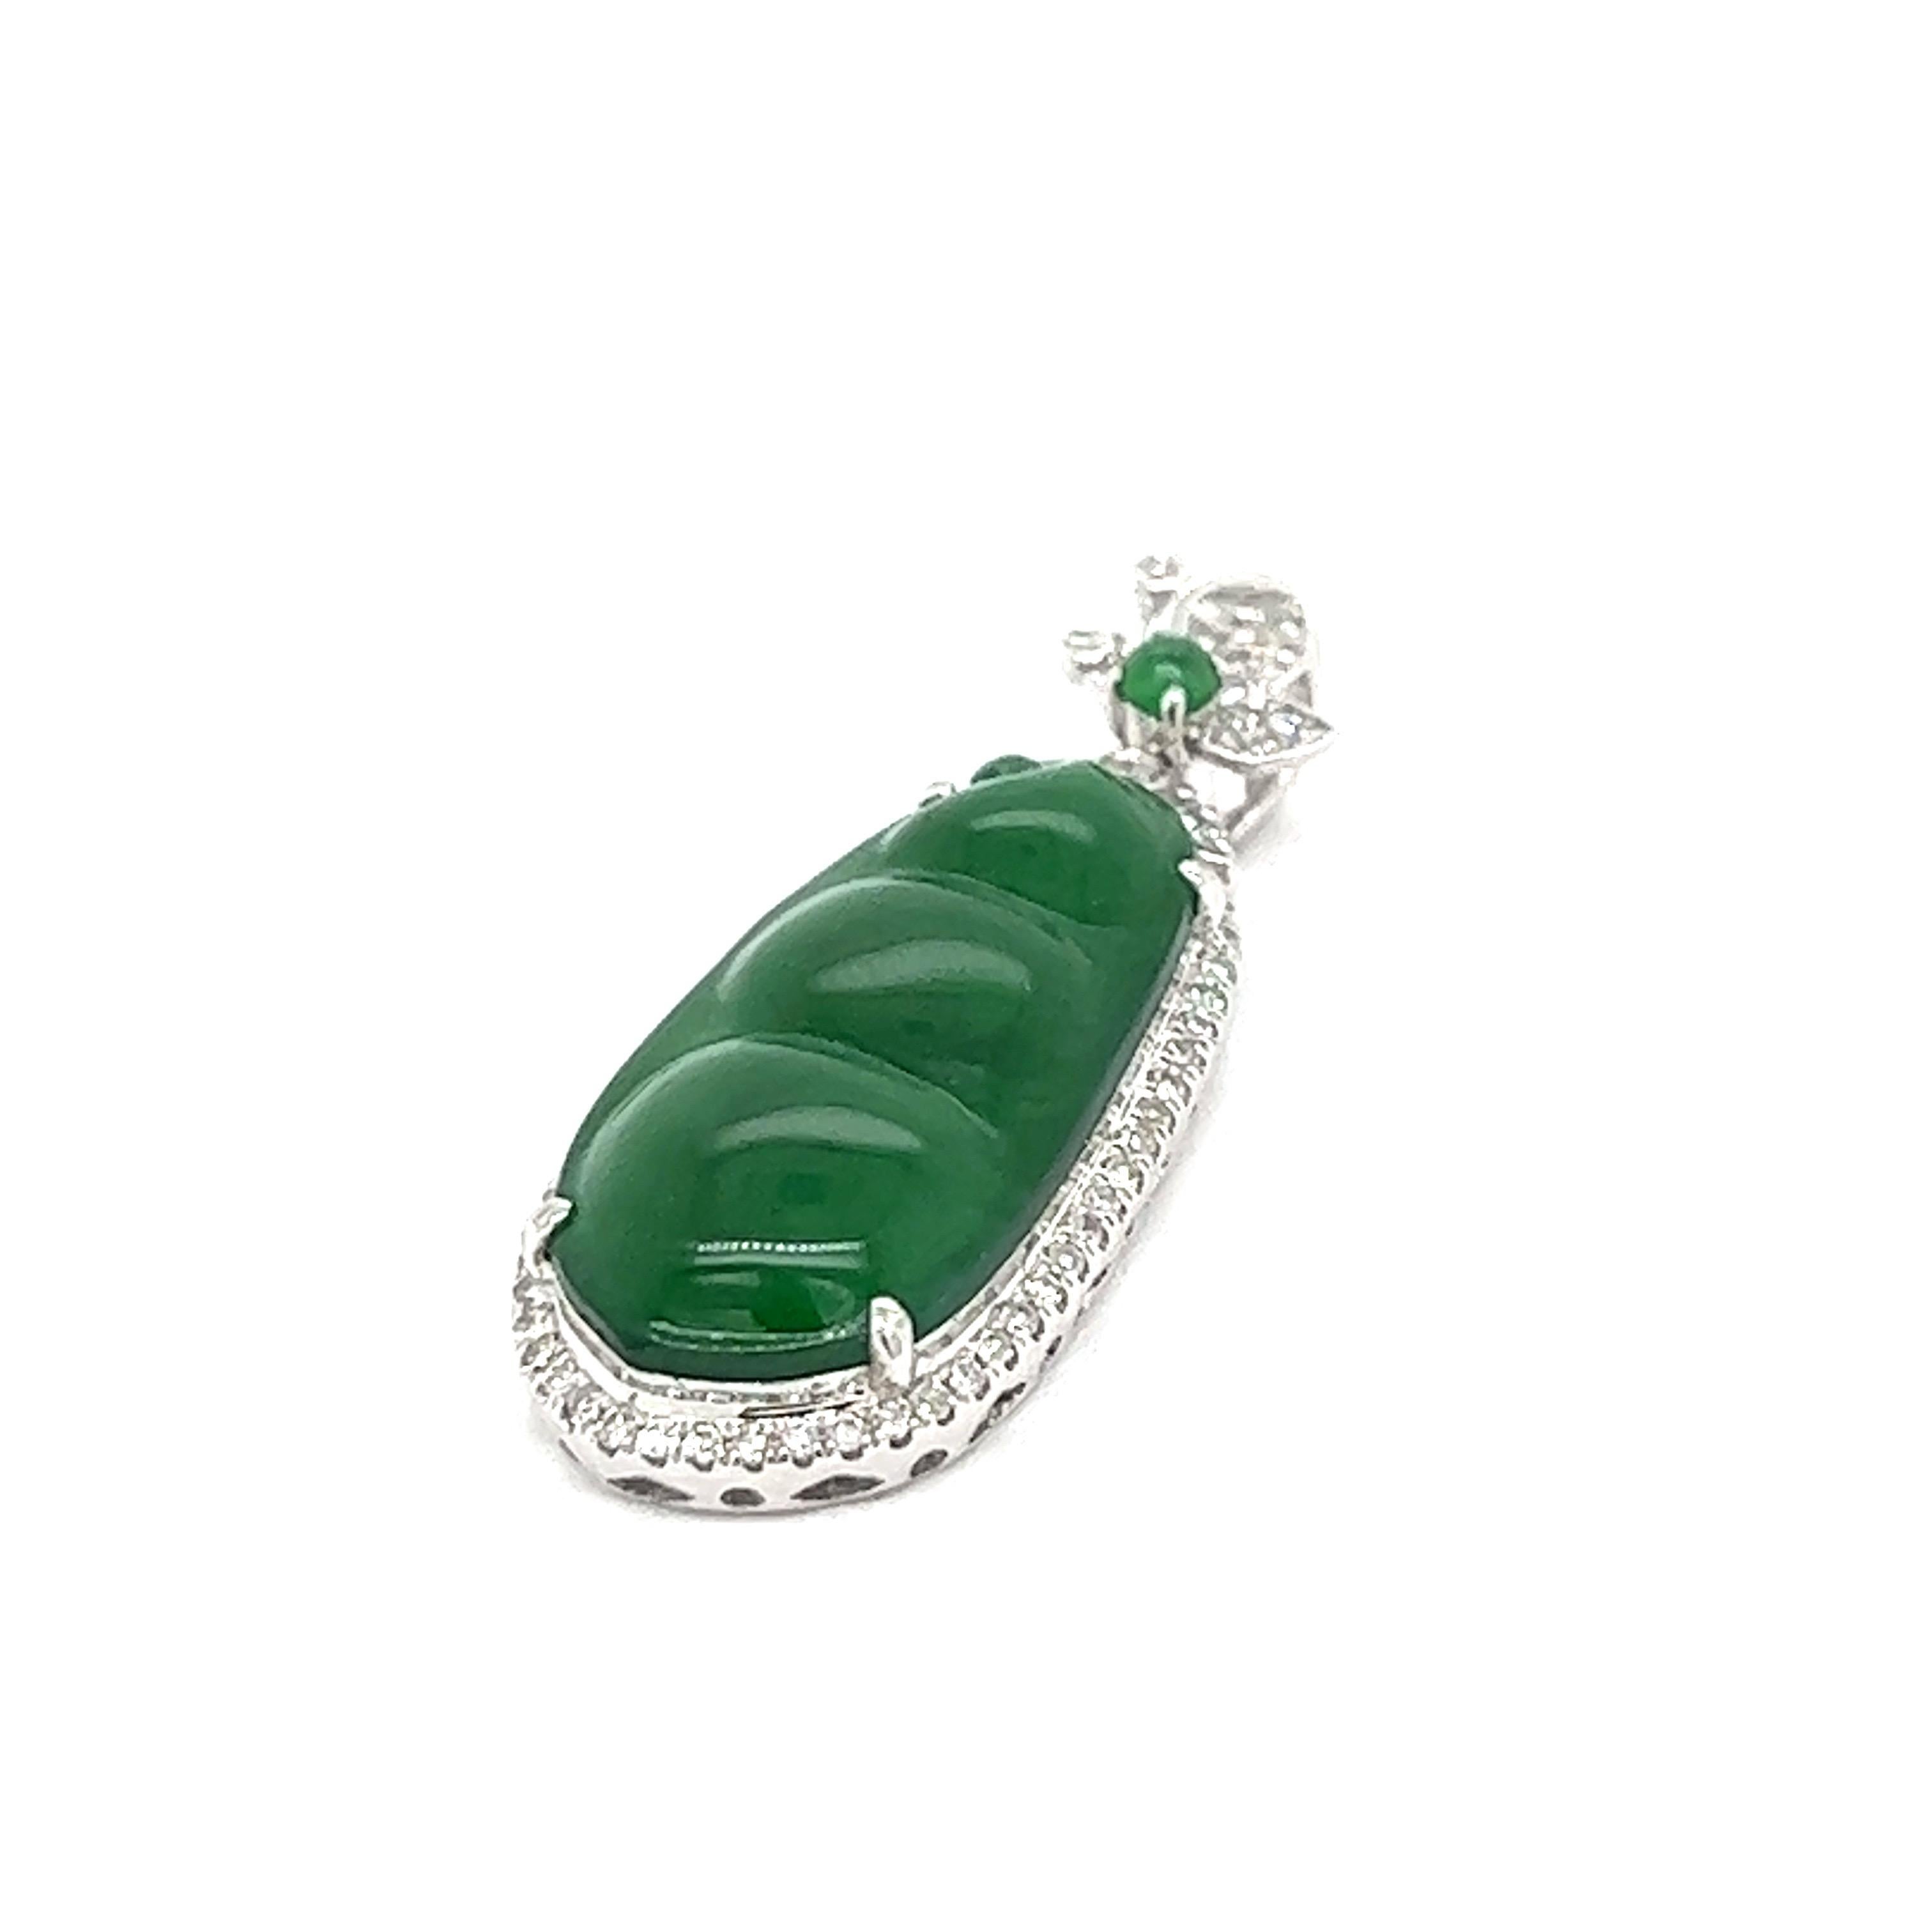 Jadeite Jade Peapod 18k White Gold Pendant

A peapod made of natural jadeite jade with no dye or impregnation detected, surrounded by round and single-cut diamonds, set on 18 karat white gold. Comes with Mason-Kay certificate.

Size: width 1.2 cm,